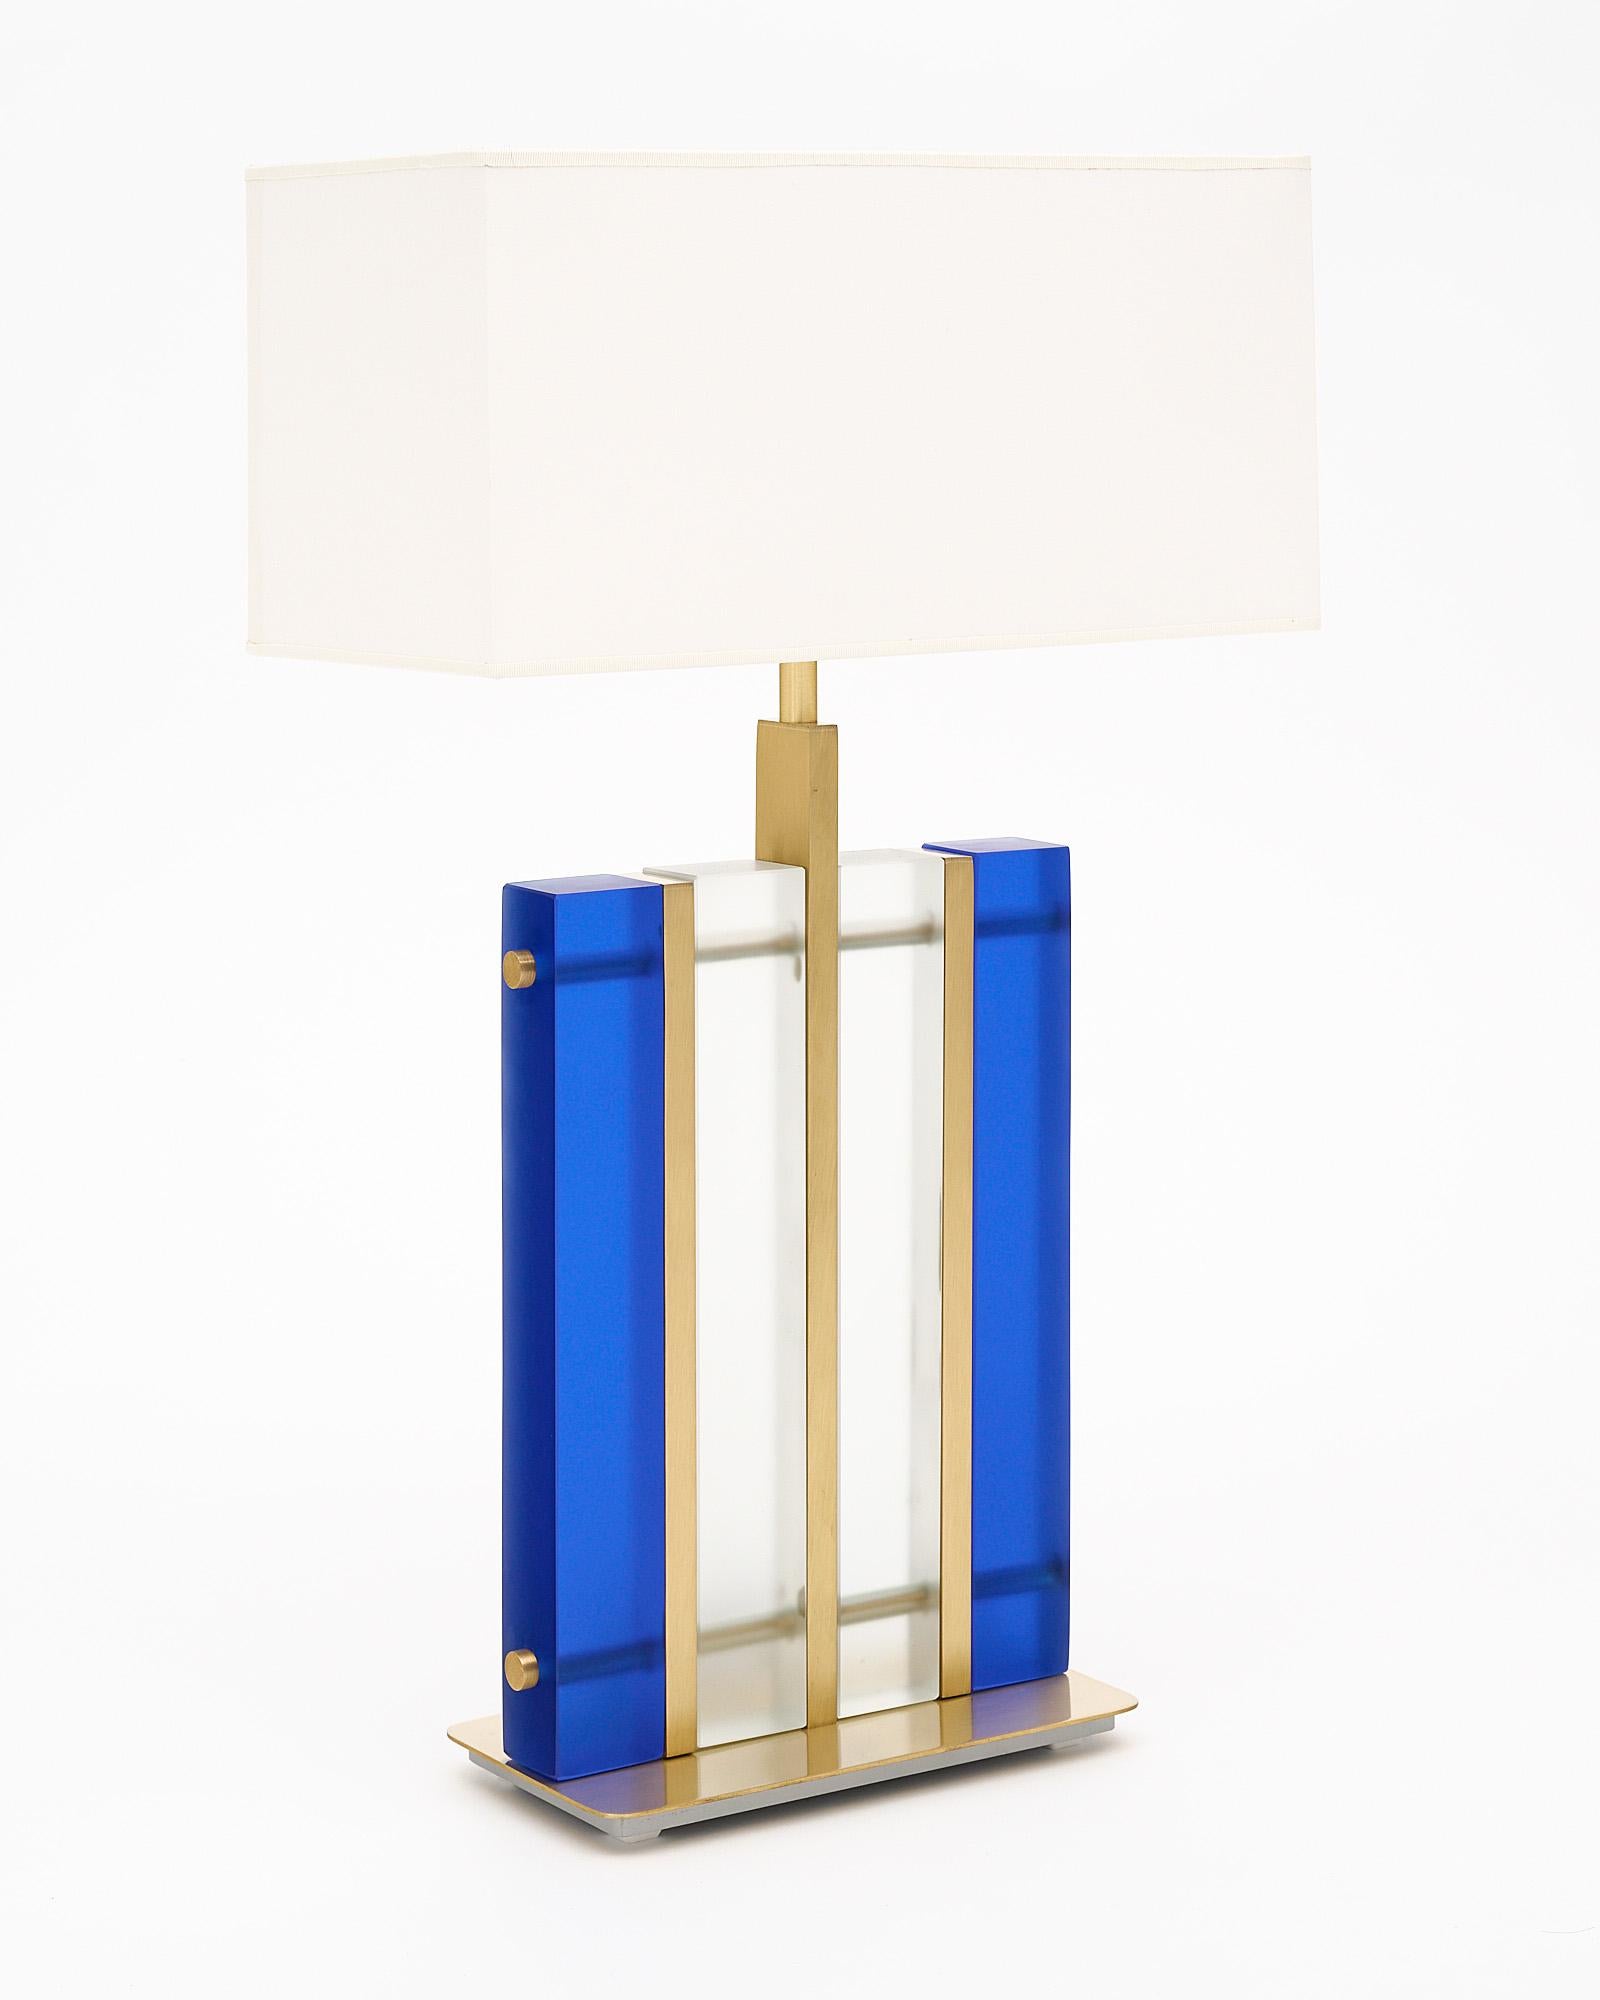 Murano glass cobalt “tormalina” slab lamps with beautiful brushed brass structure. We love the hand-blown slab glass elements in both a frosted clear and frosted cobalt blue hue. These striking, modern fixtures have great impact on a space. They